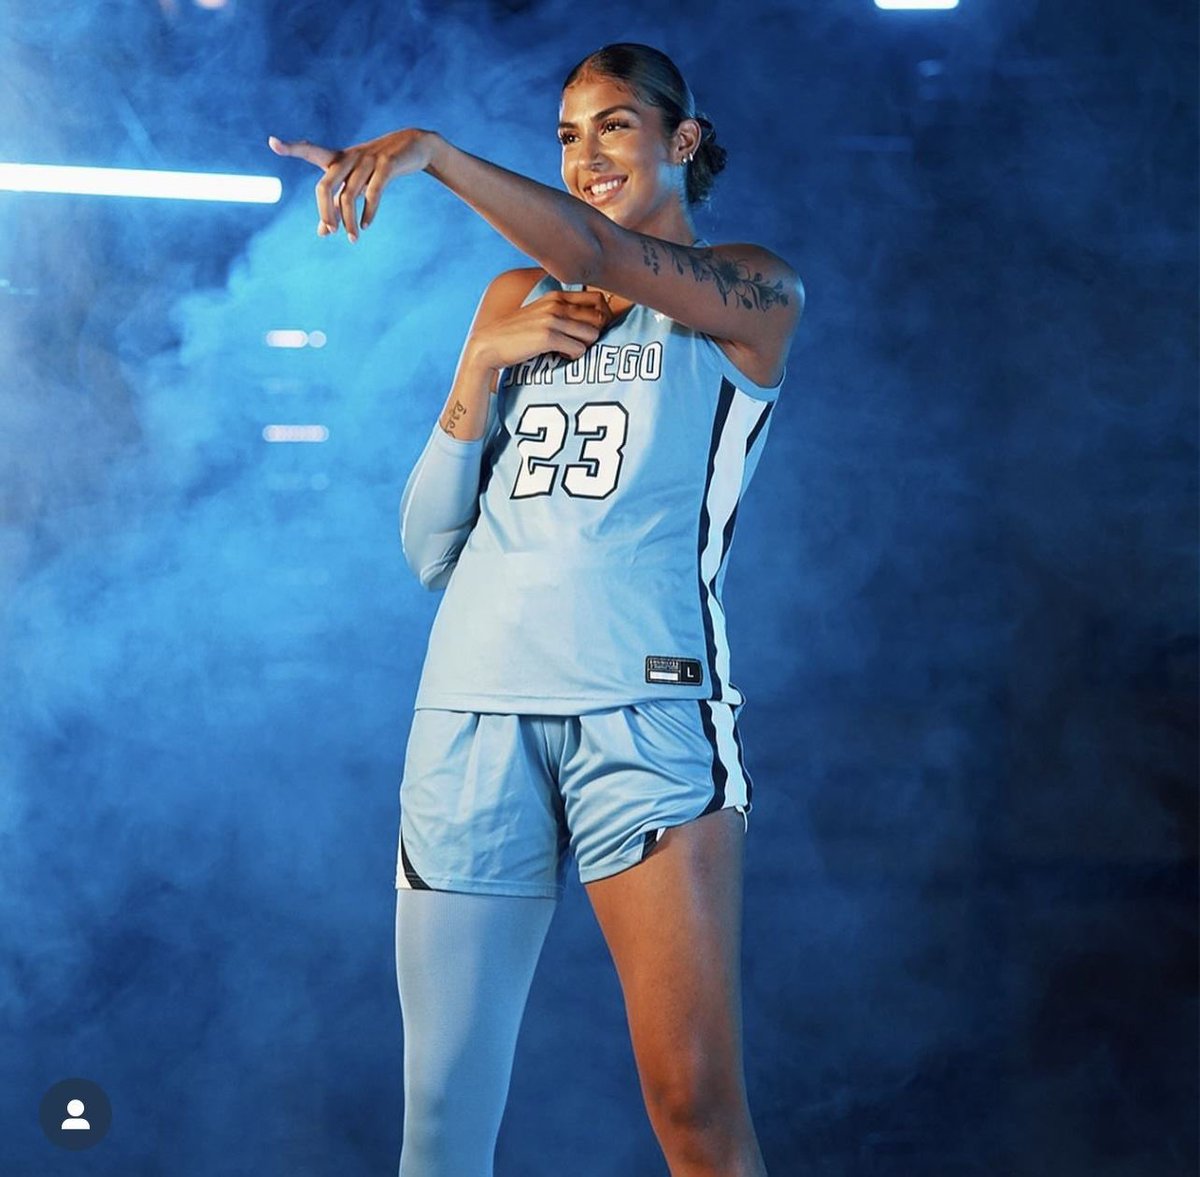 JUST IN: San Diego transfer Harsimran “Honey” Kaur committed to @RhodyWBB. URI makes their first portal addition of the offseason. The 6’4” forward joins the Rams for her senior year after spending the last three seasons with the Toreros. Welcome to Kingston, @Honeykaur23!